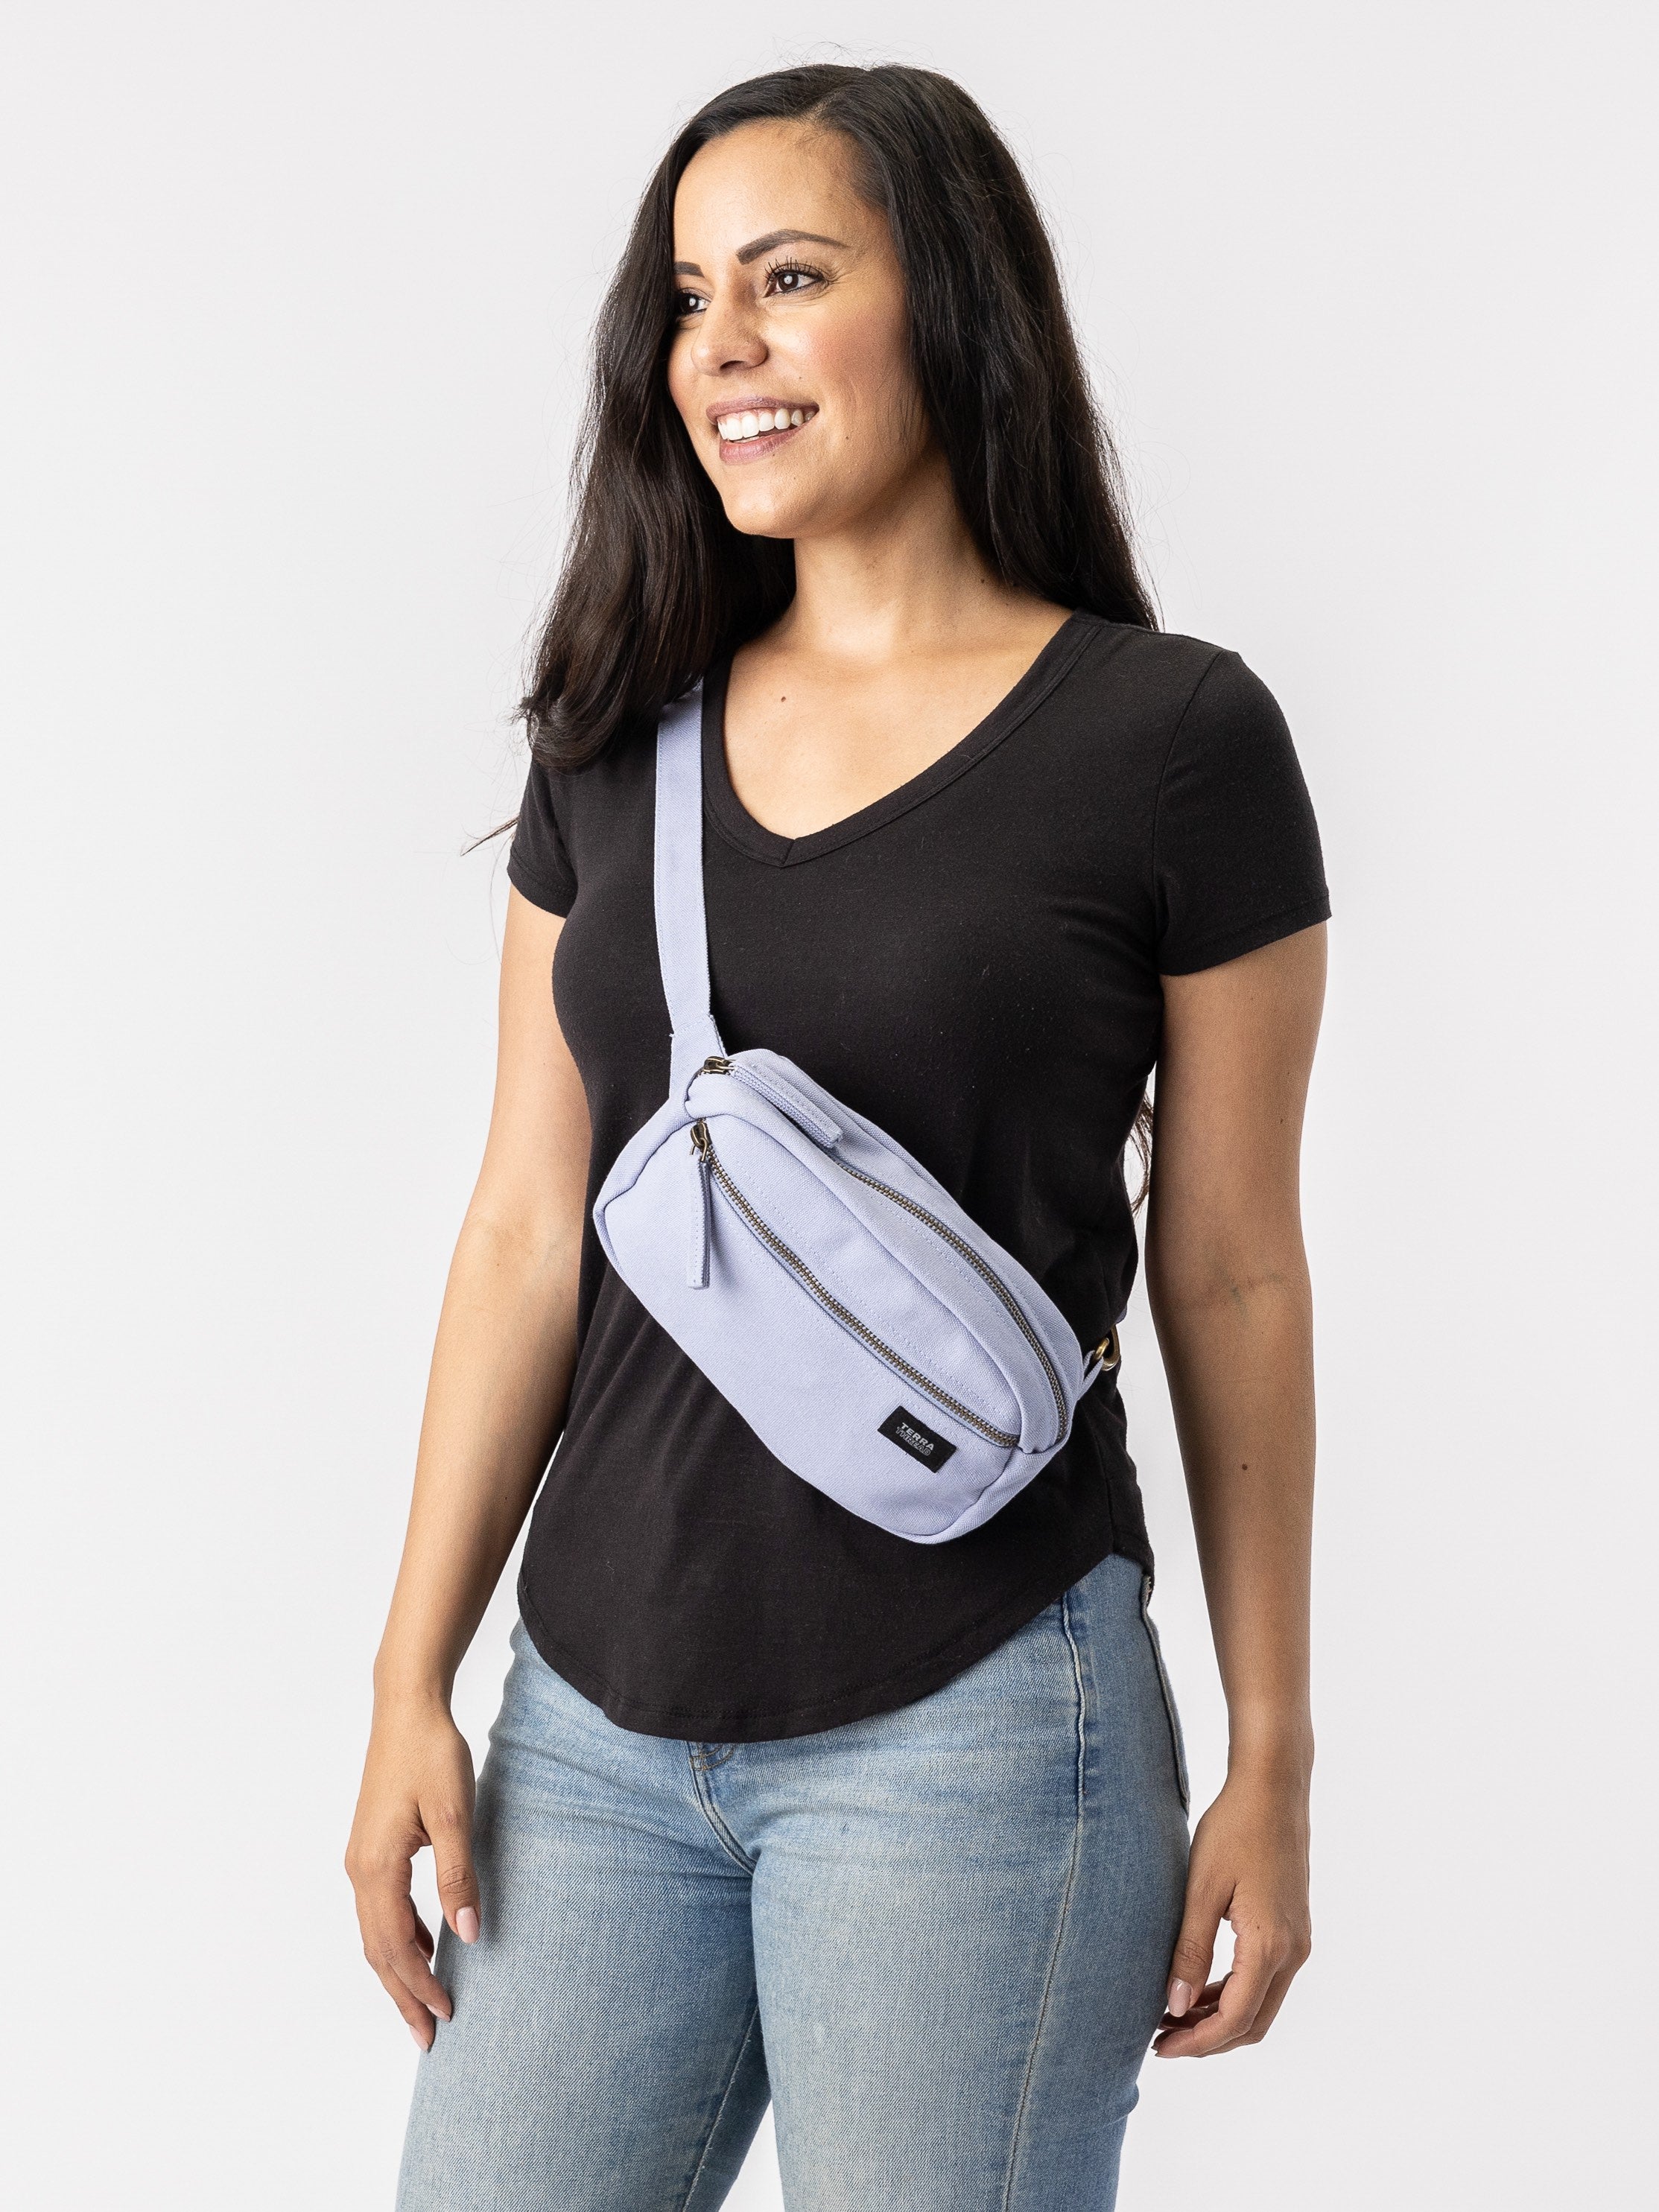 lavender fanny pack made of organic cotton